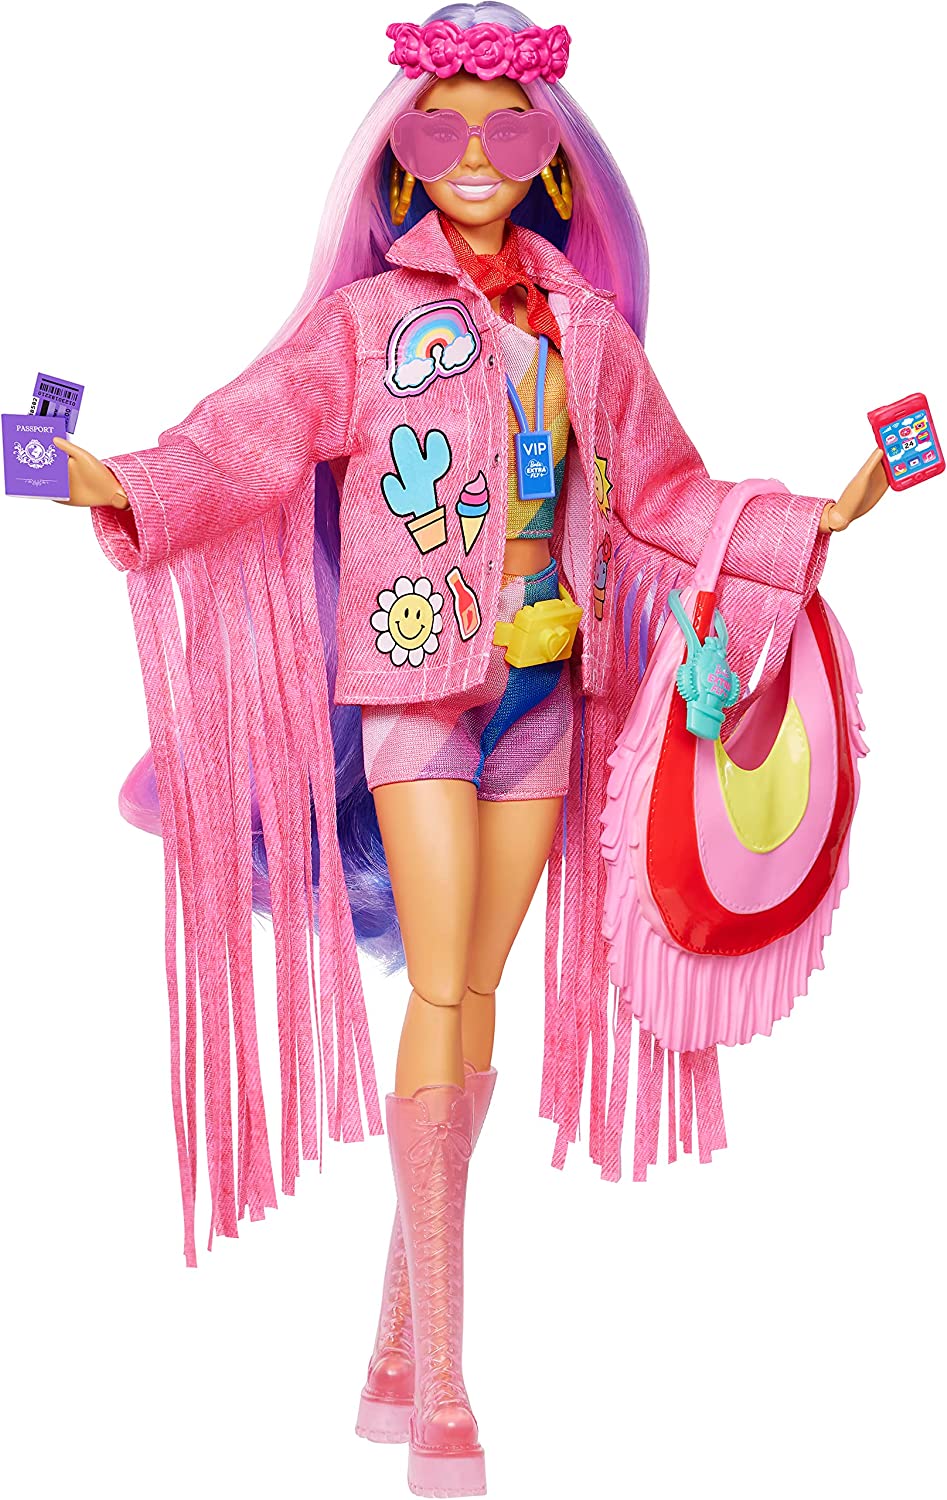 Barbie Extra Deluxe Doll & Accessories Set with Pet, Mix & Match